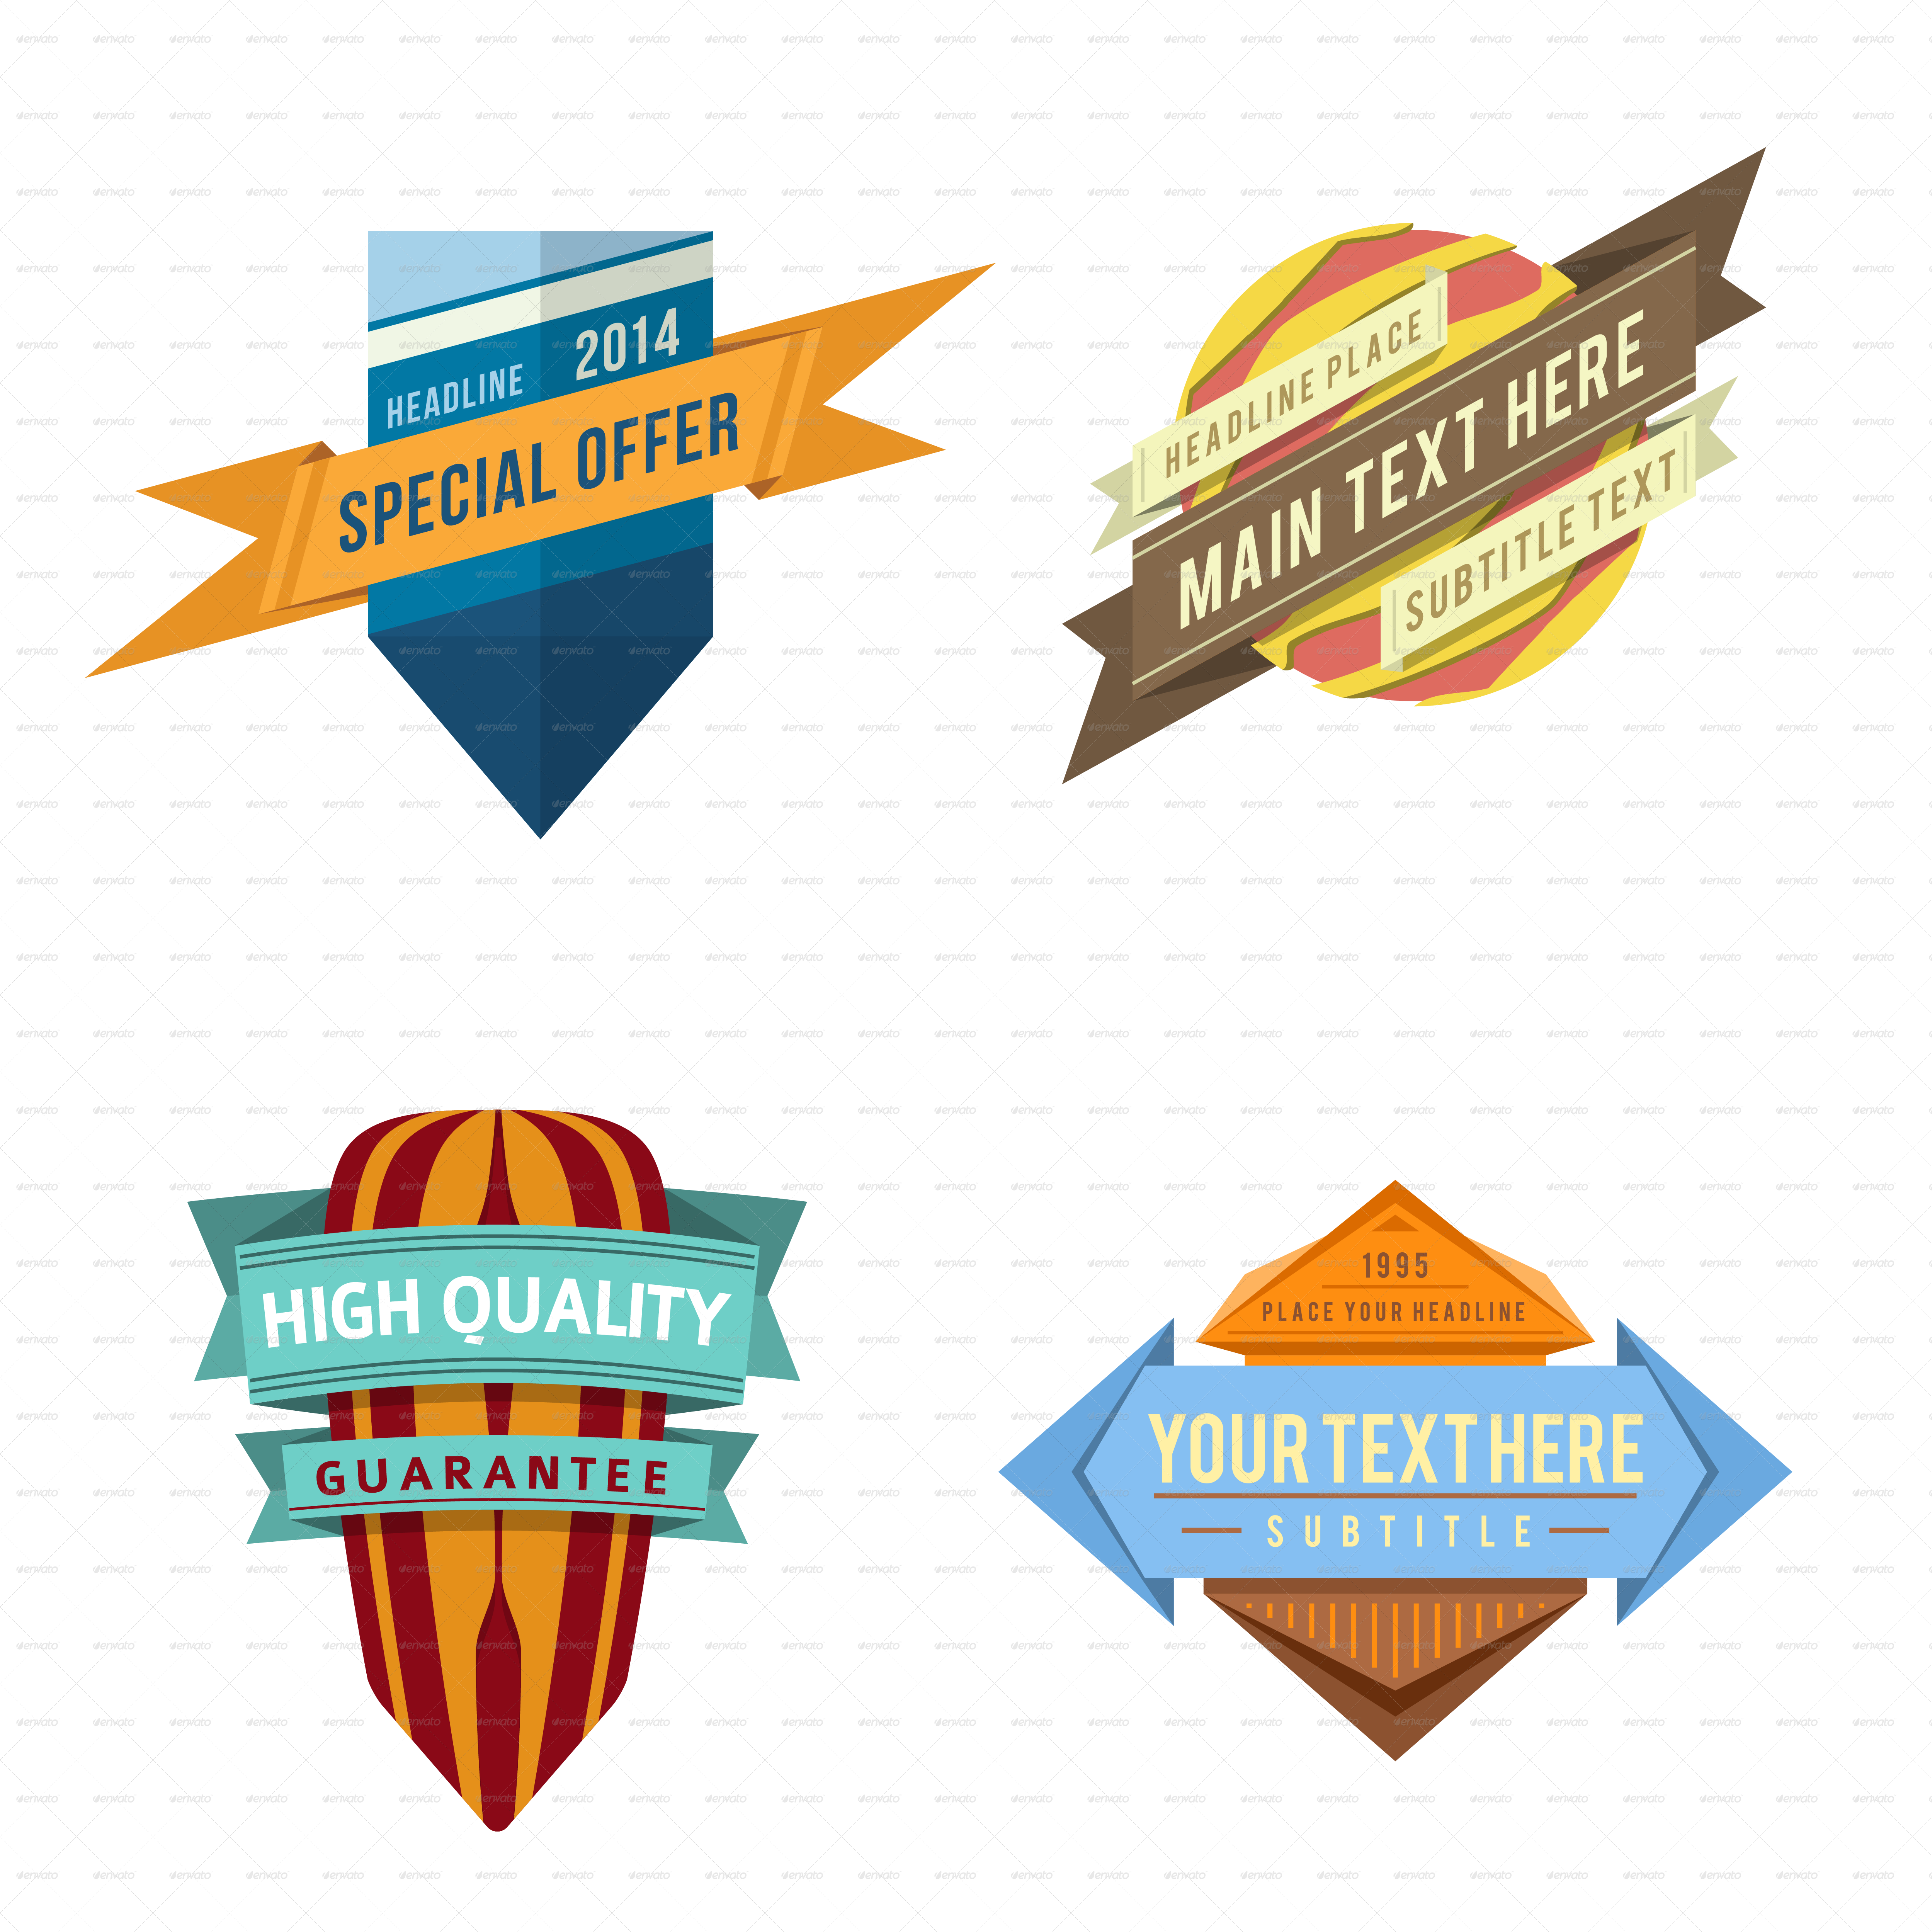 Vintage Style Badges Collection PNG image